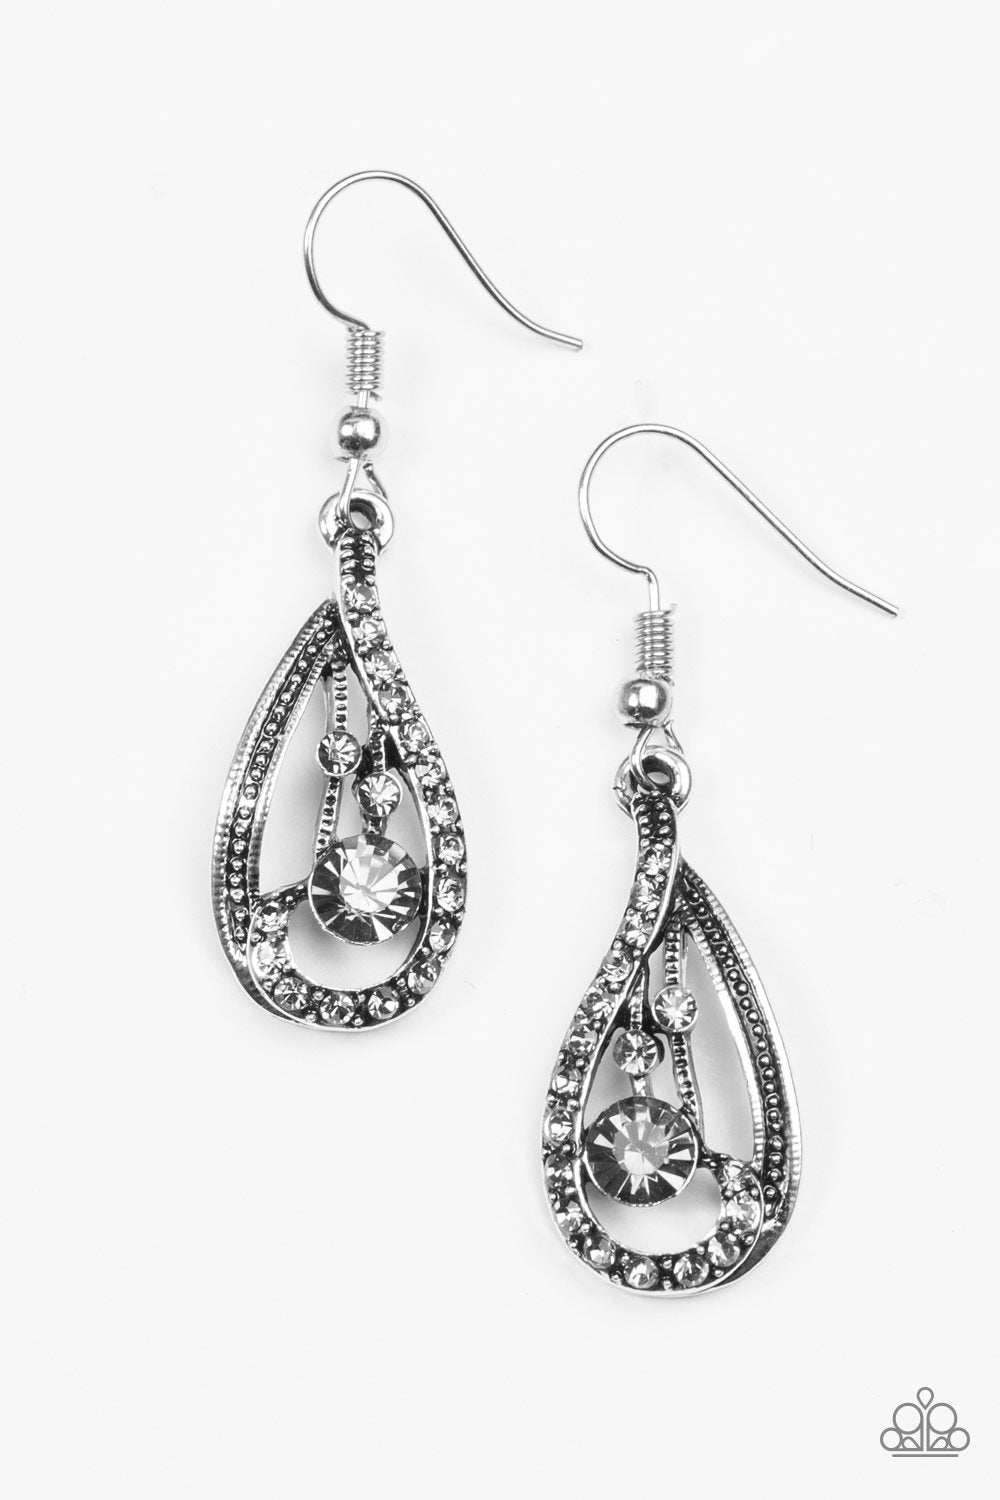 All For Show Silver Rhinestone Earrings - Paparazzi Accessories-CarasShop.com - $5 Jewelry by Cara Jewels